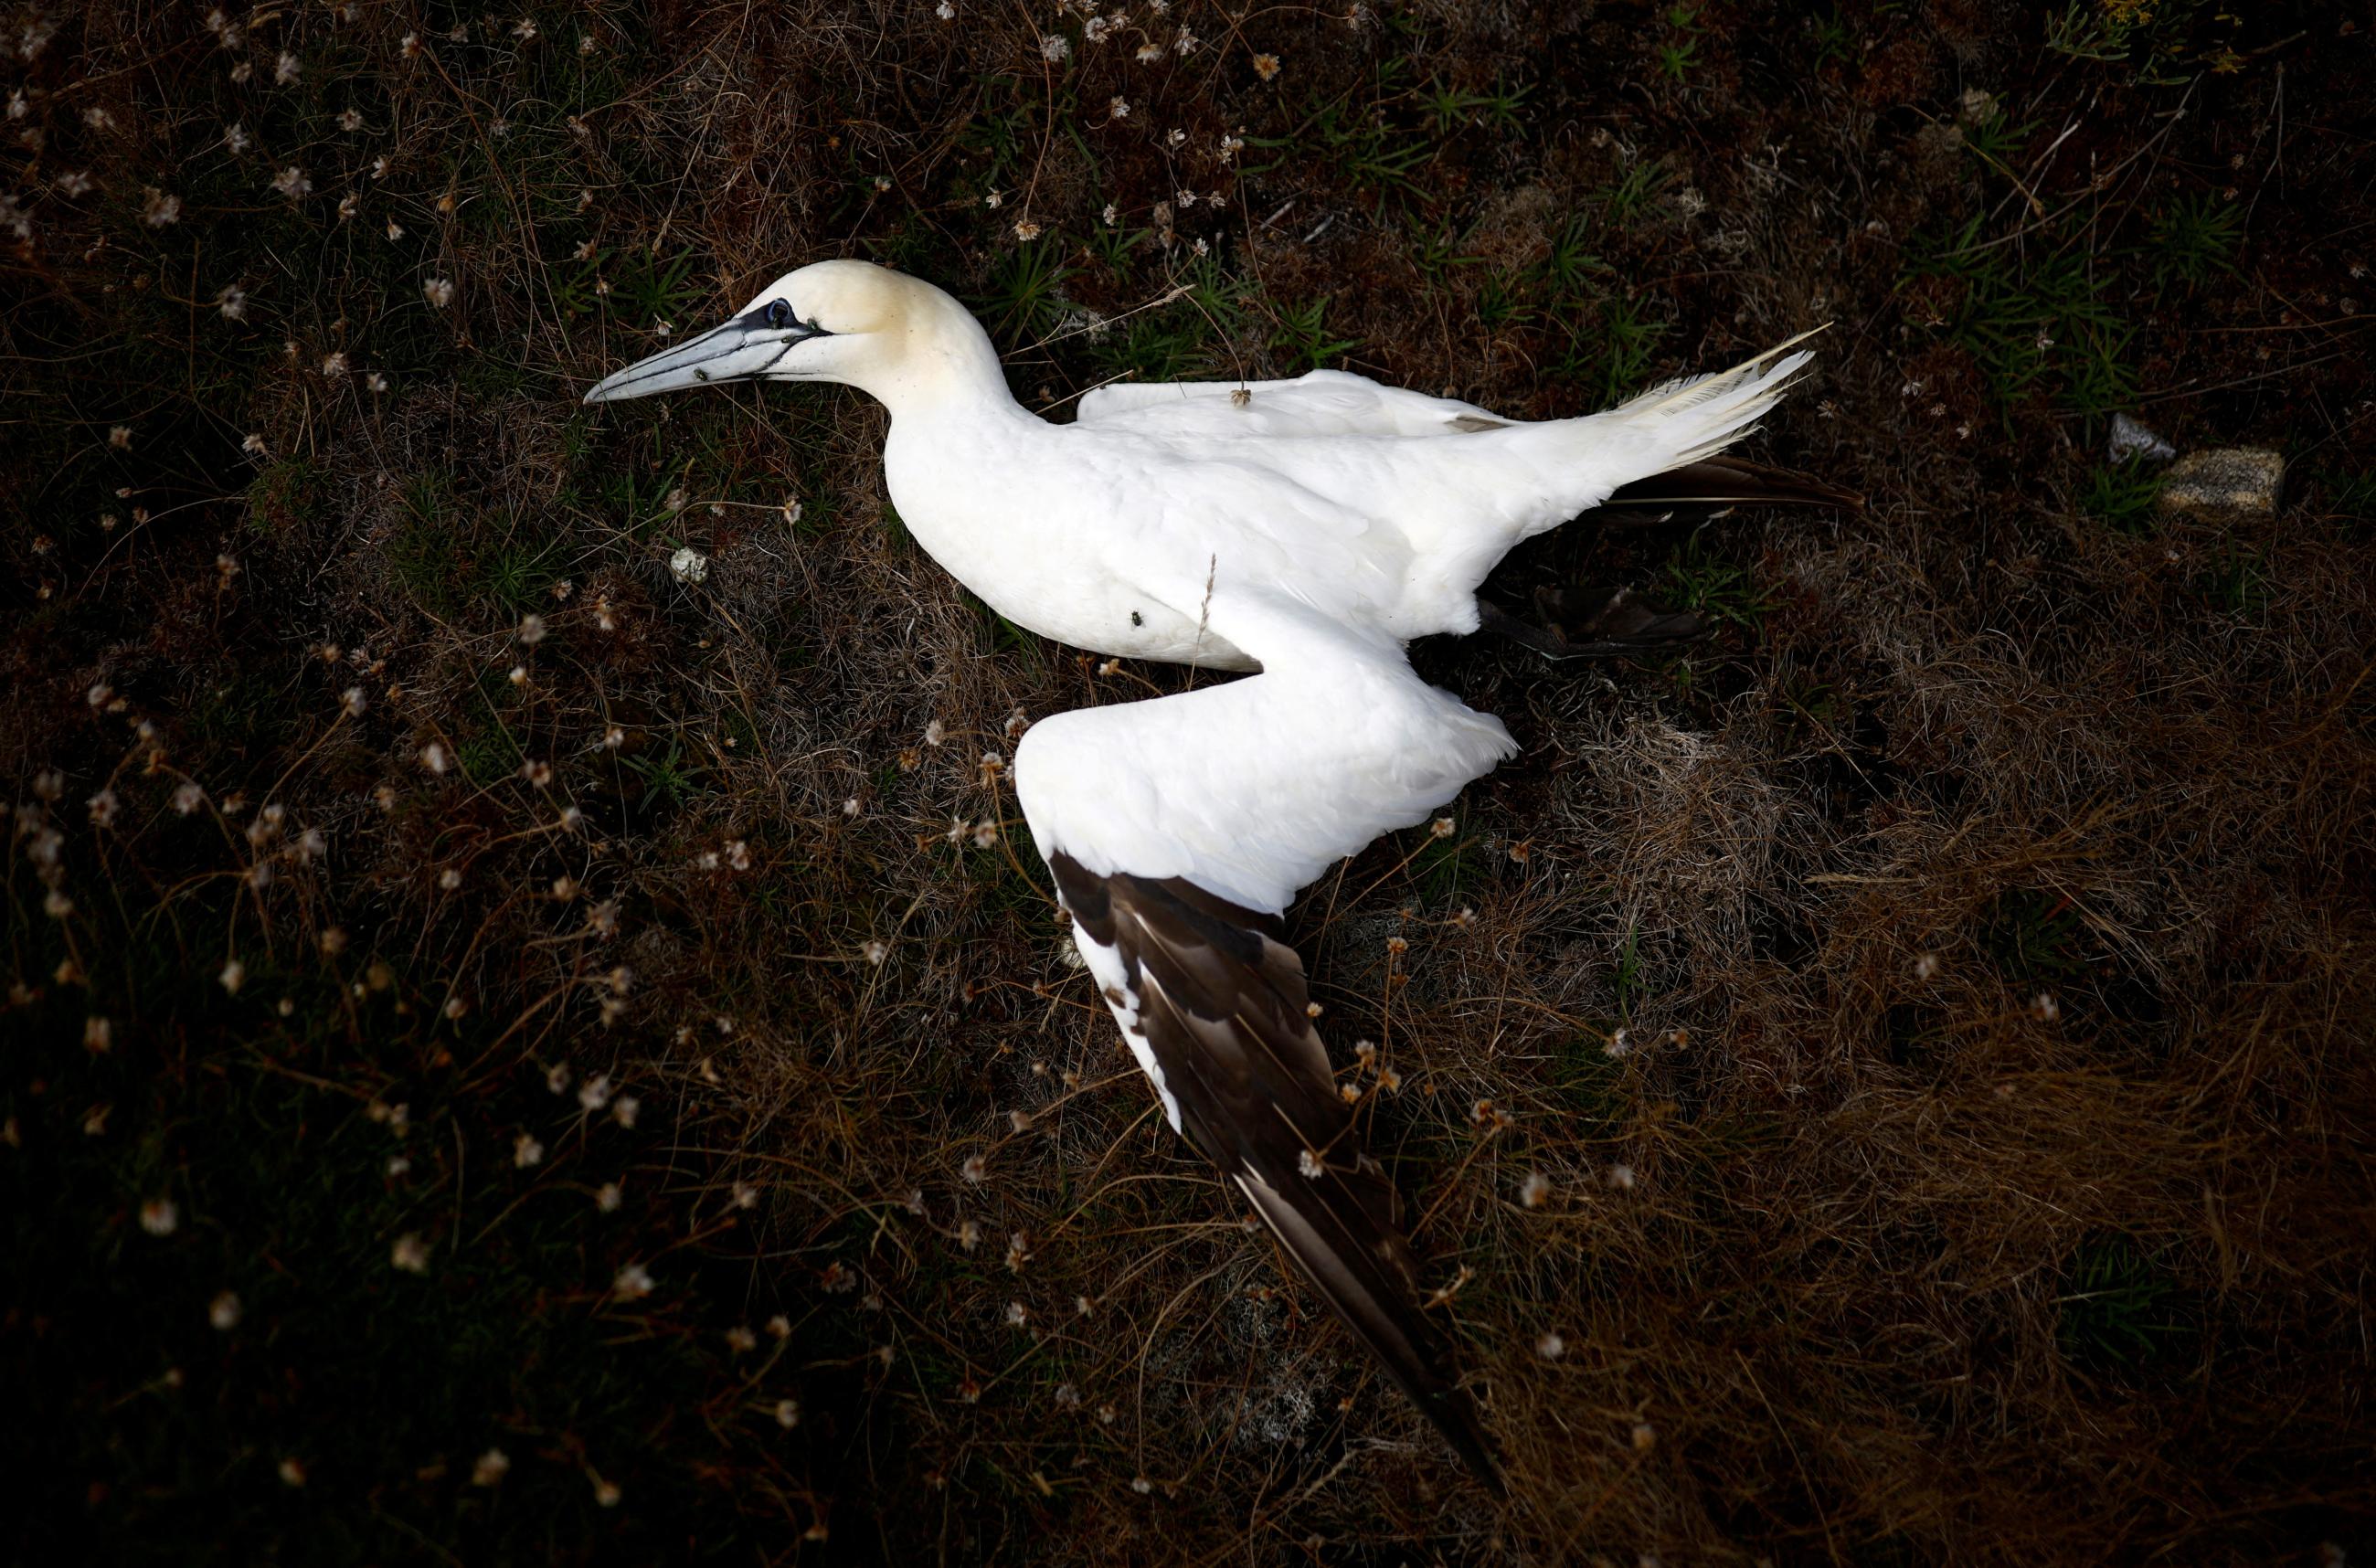 A dead northern gannet is seen near a beach in Pleumeur-Bodou as the Sept-Iles archipelago bird reserve is affected by a severe epidemic of bird flu, in Brittany, France, on September 6, 2022.